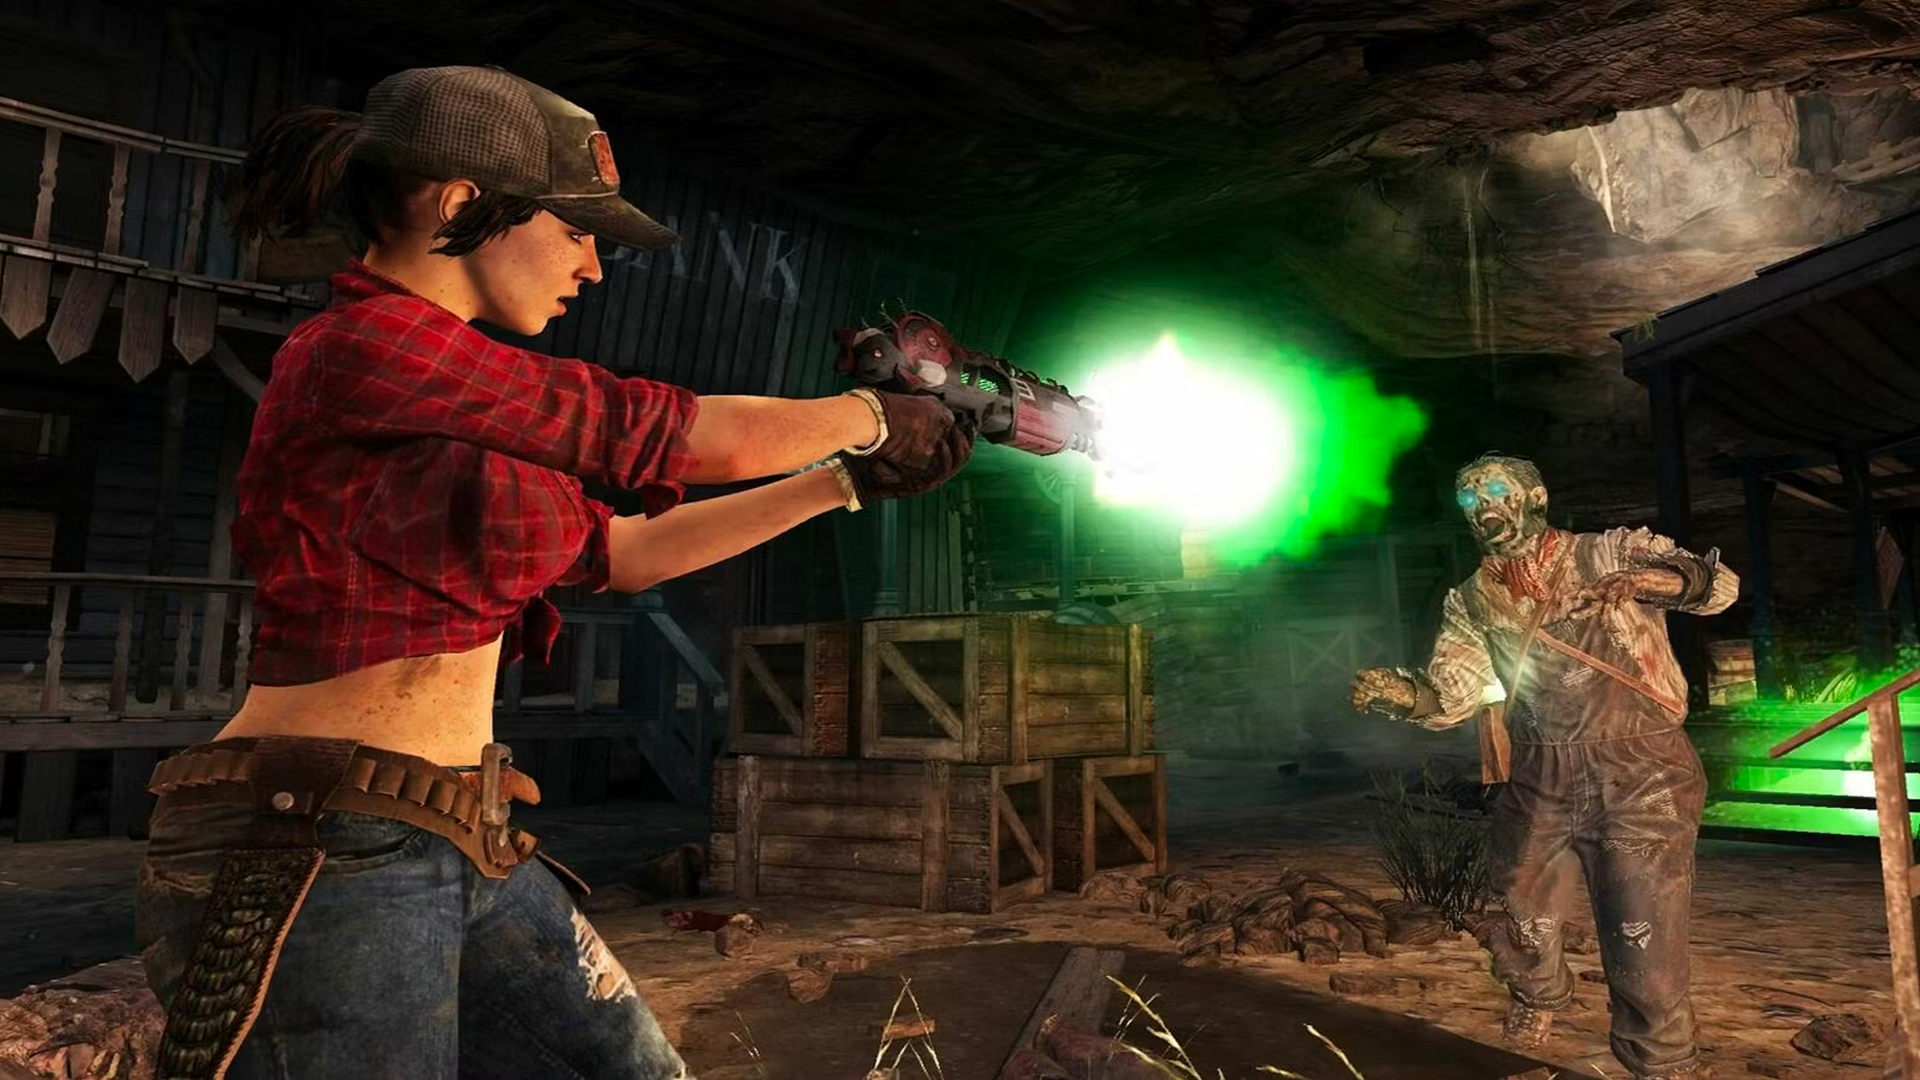 Black Ops 2 Zombies returns with new maps and modes